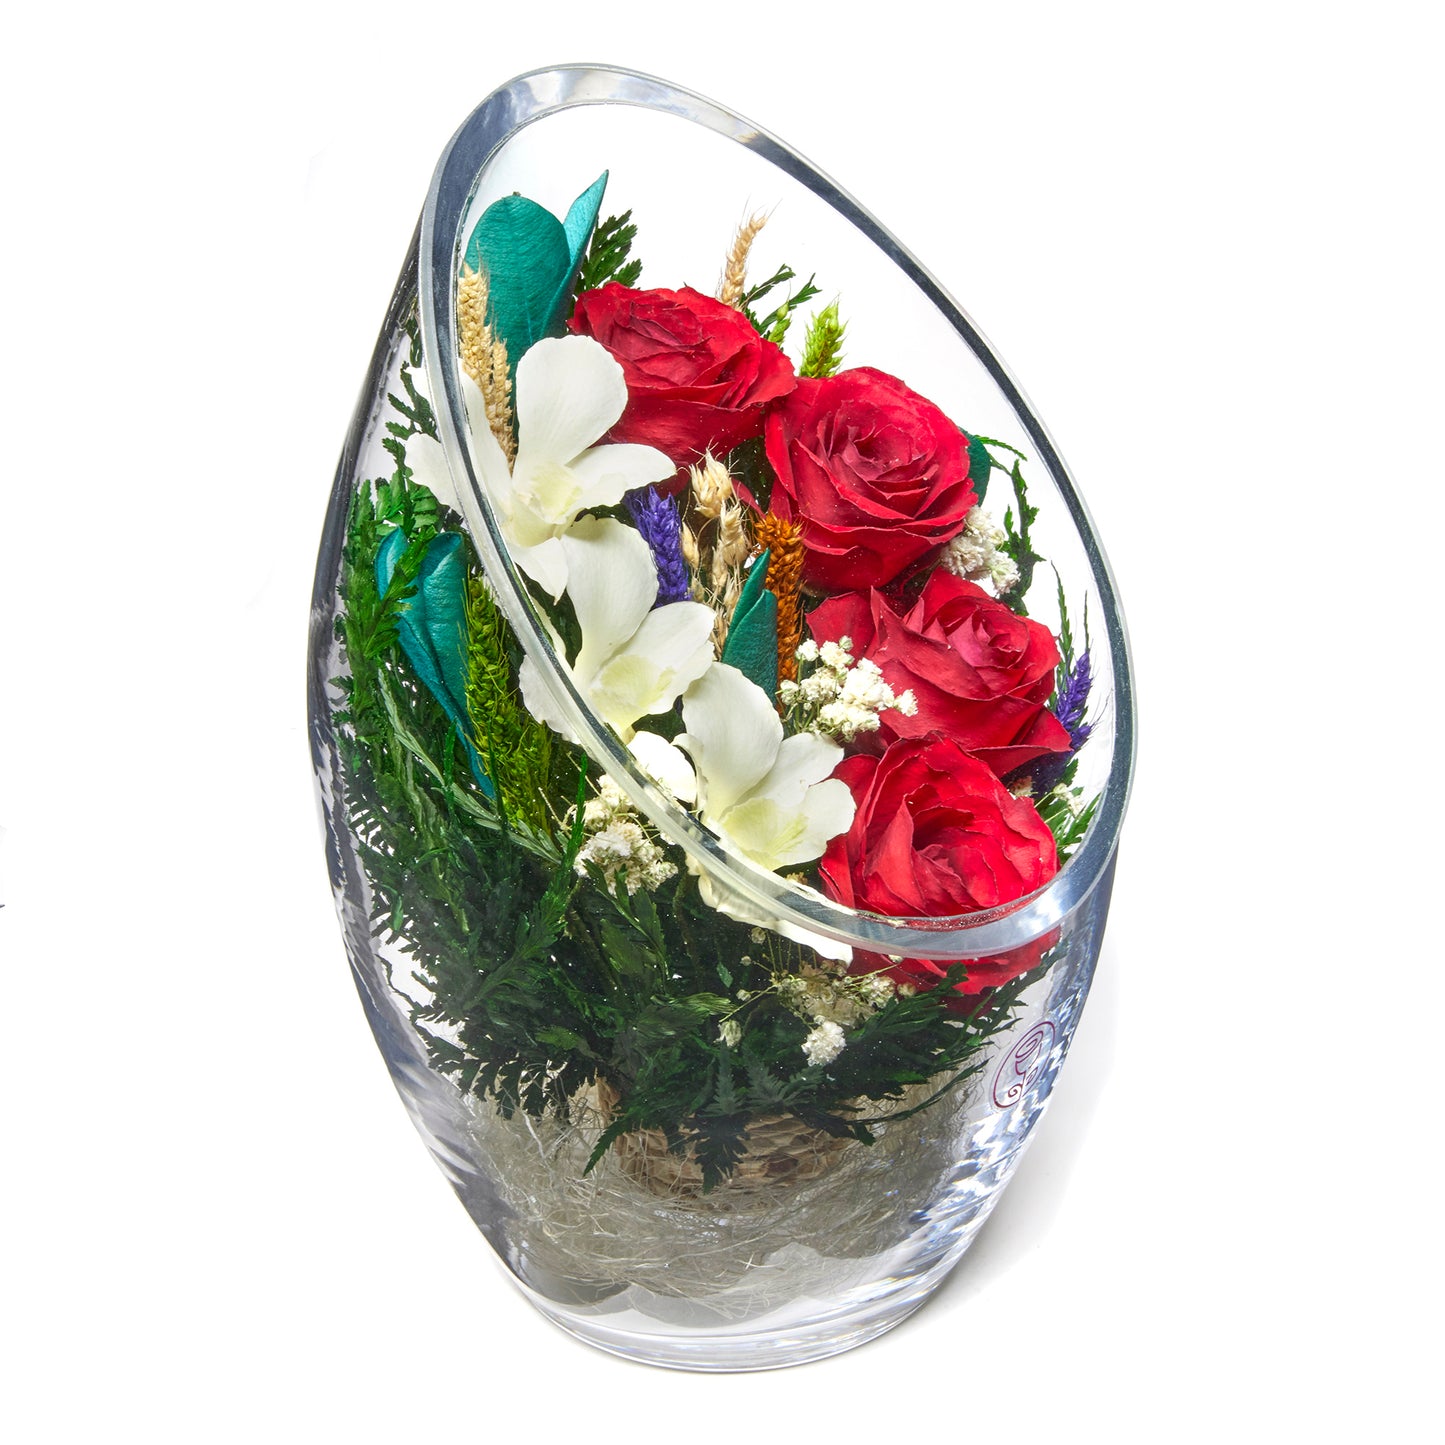 In Flores Veritas: Dynamic Harmony Tilt Rugby Vase - Lasts up to 5 Years - Elegant Gift for Any Occasion